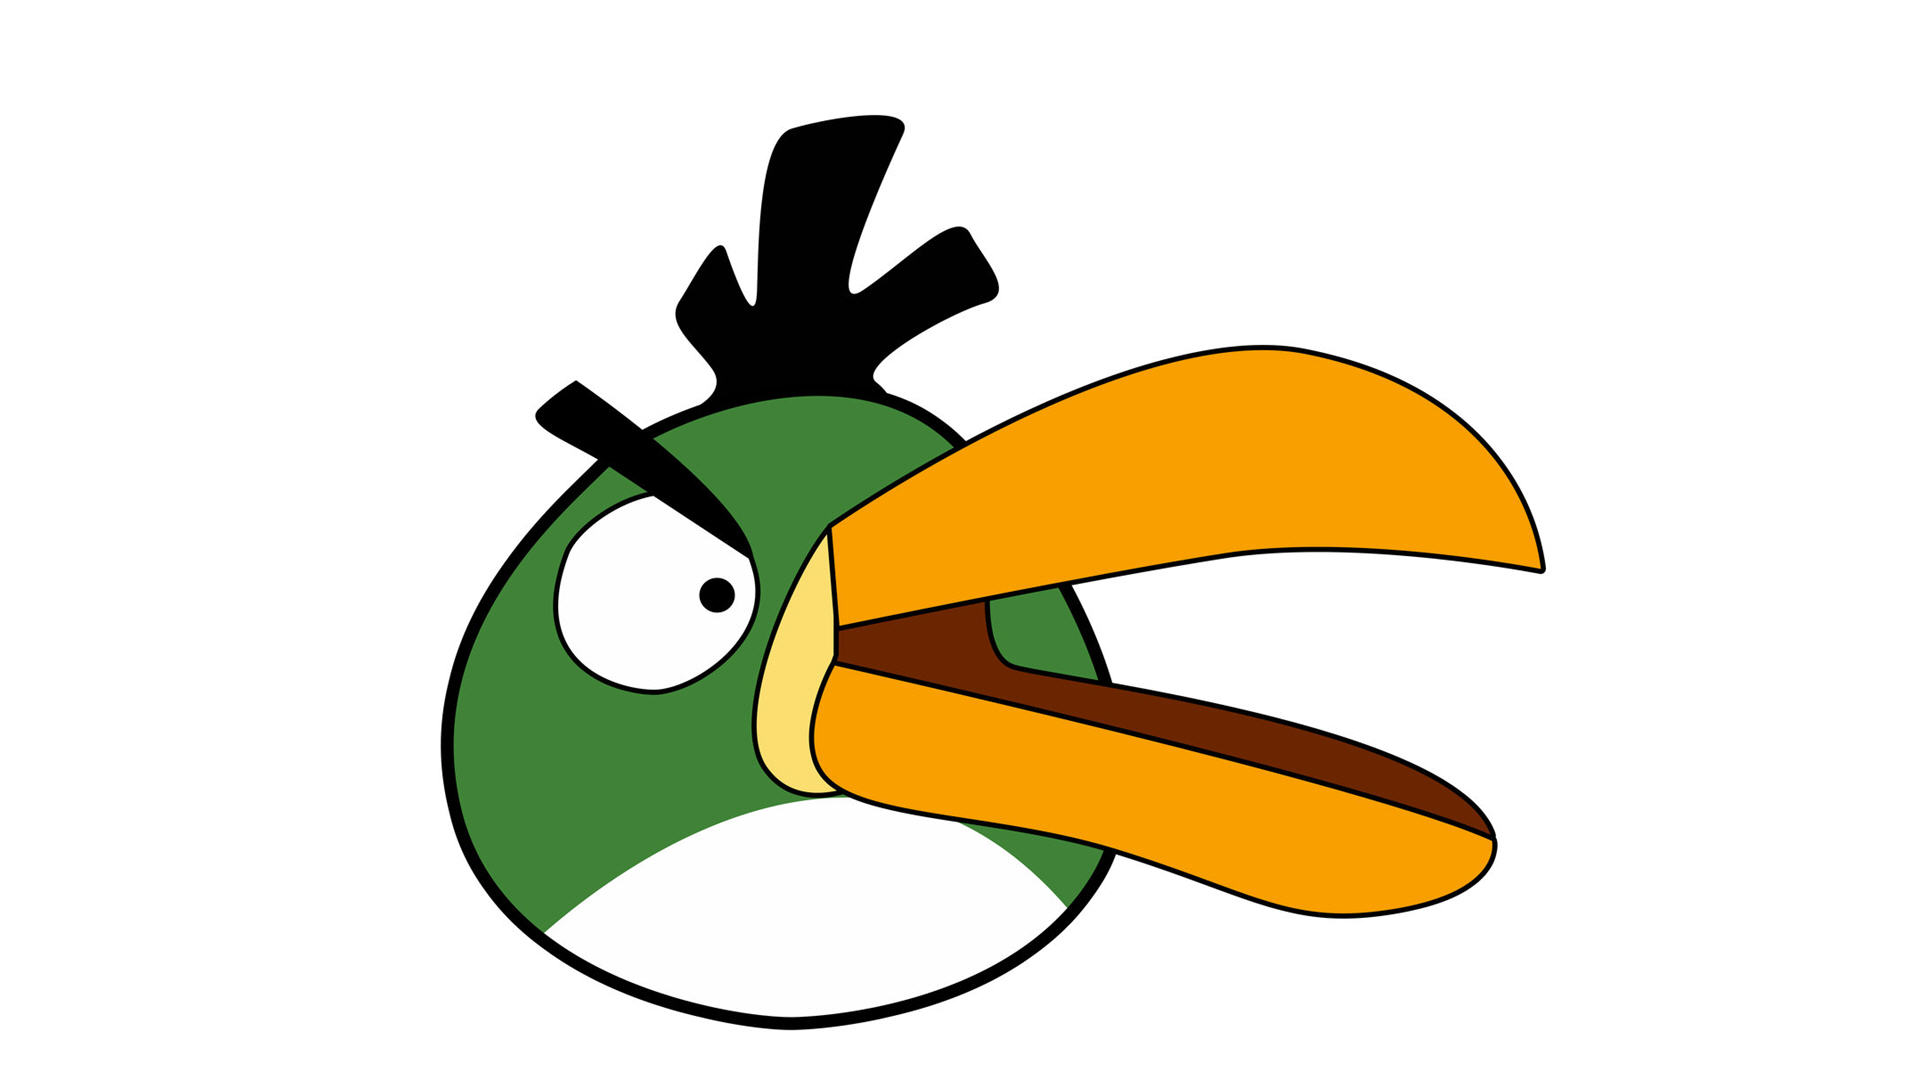 Green Angry Bird 30411 1920x1080 px